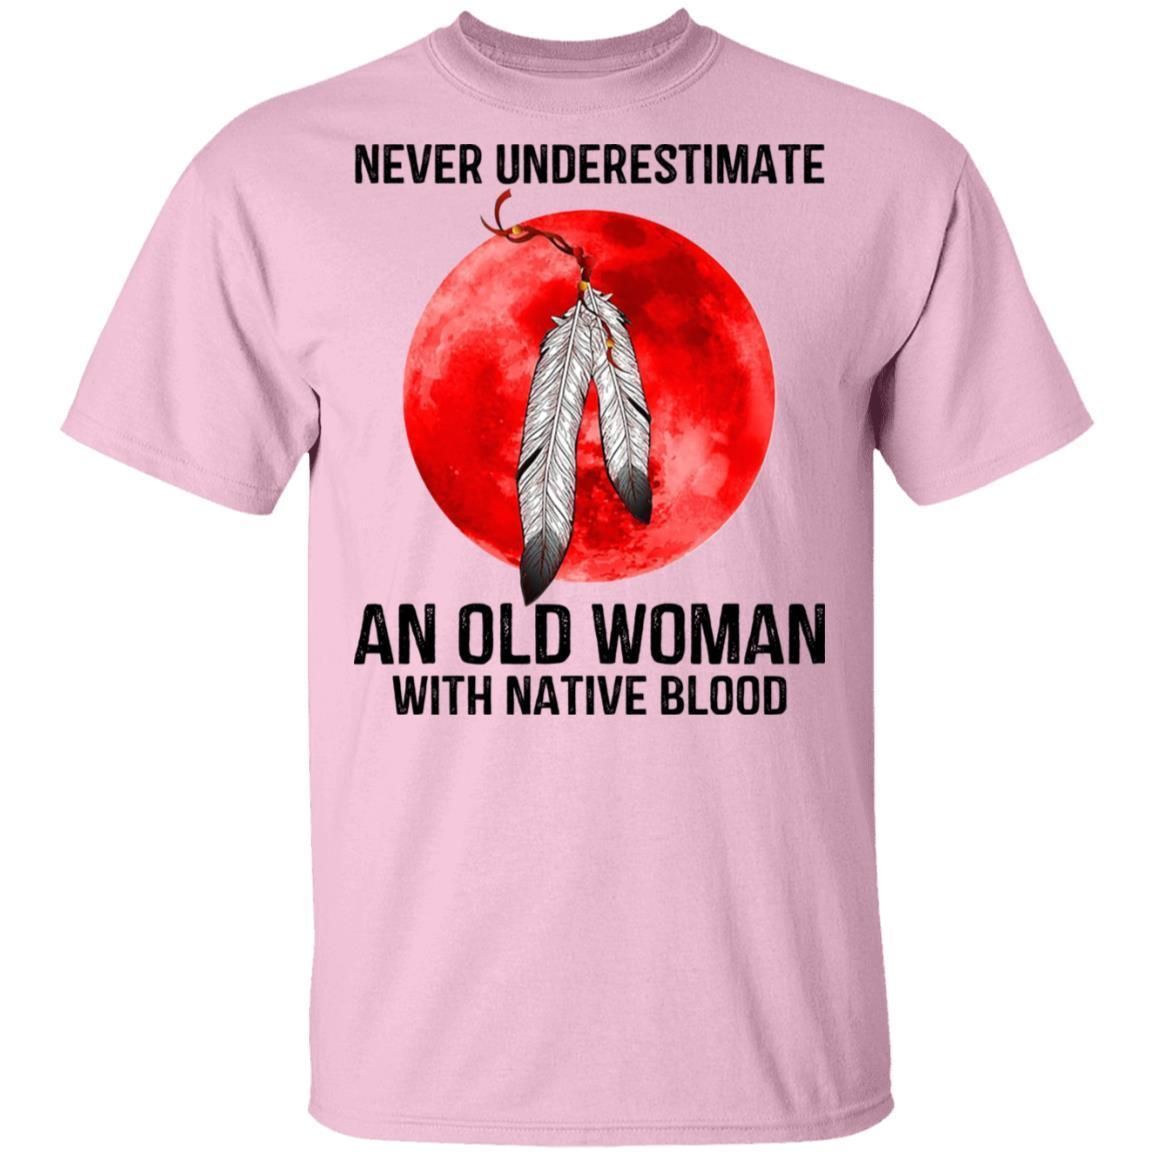 Never underestimate an old woman with native blood shirts